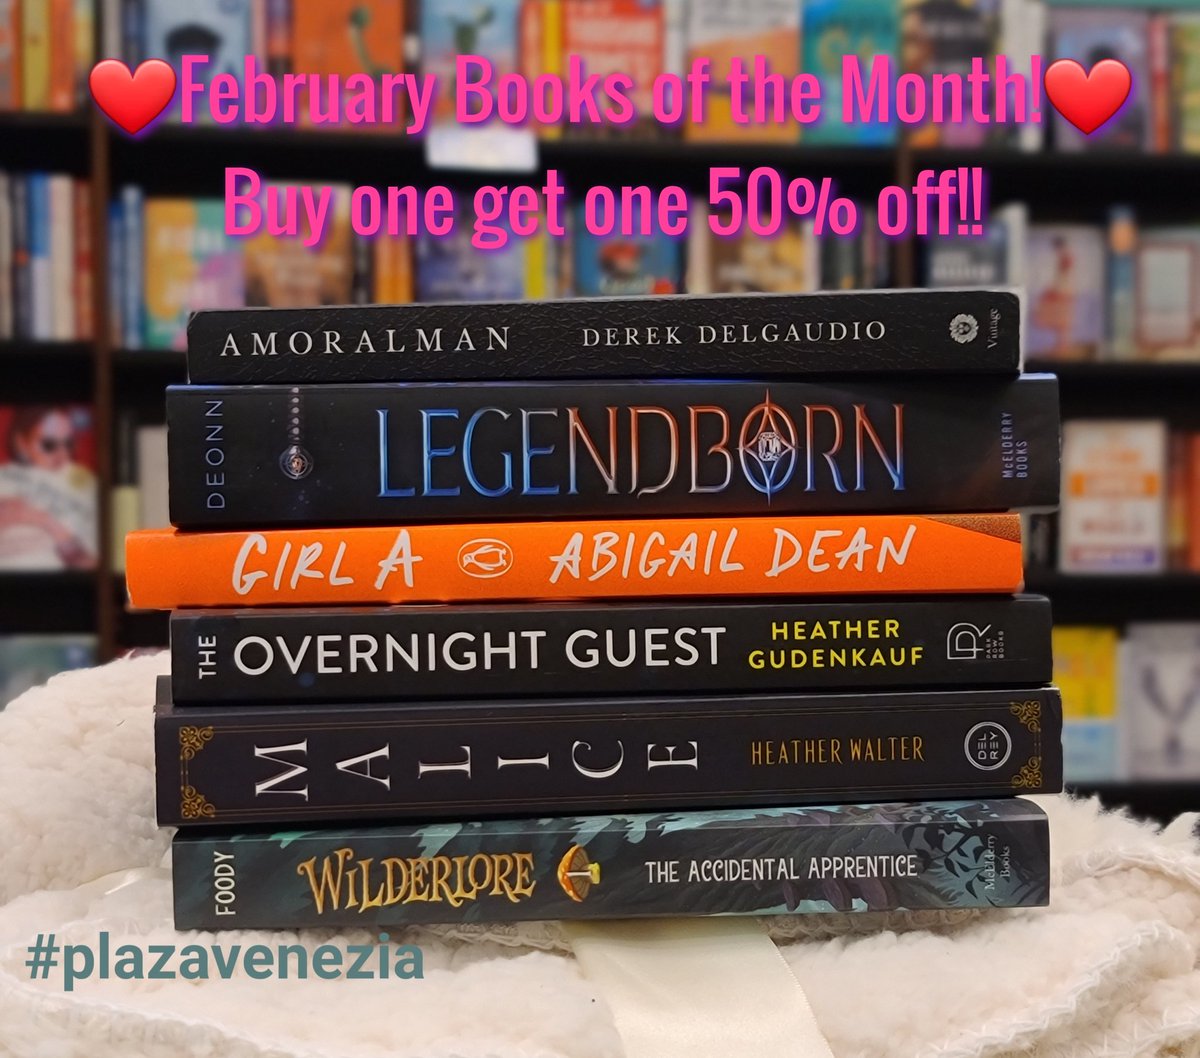 We are so excited about February's Books of the Month! Can't decide which one to buy? Great news! They are buy one, get one 50% off!
 
#bnplazavenezia #bn #bnvolved #drphillips #bnbuzz #books #amoralman #legendborn #girlA #theovernightguest #malice #theaccidentalapprentice